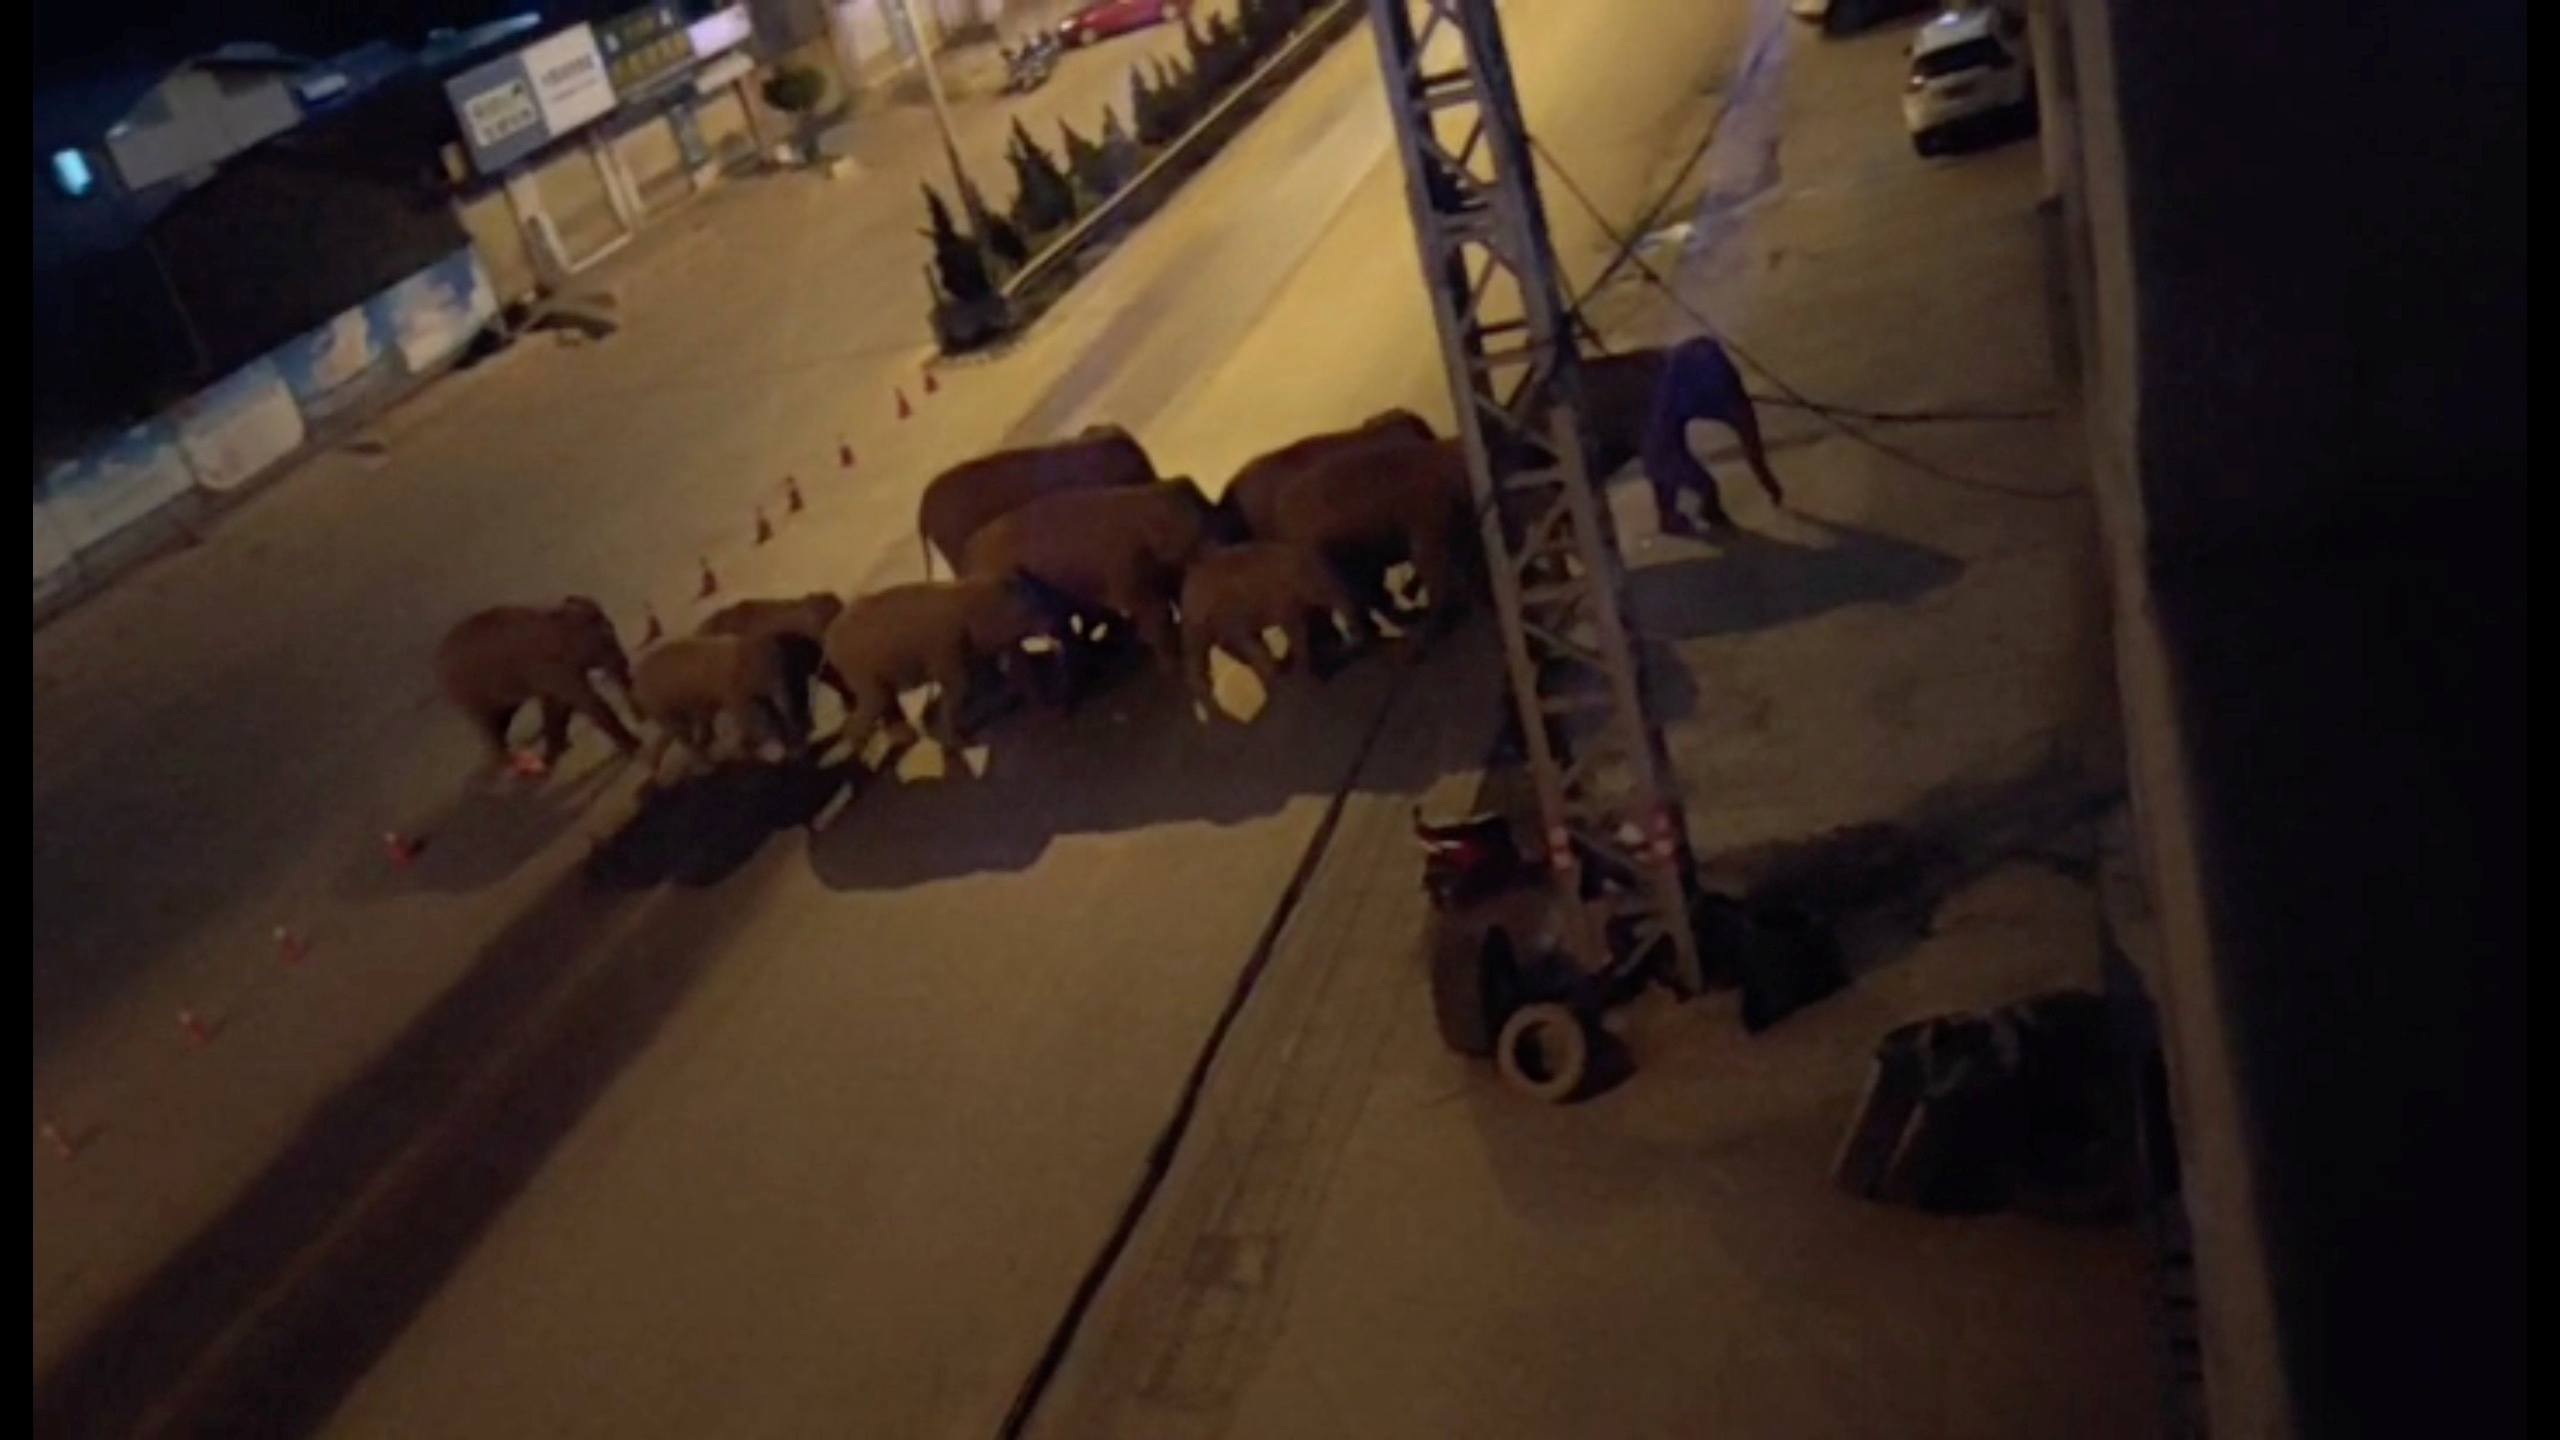 A herd of elephants walk along a road in Eshan, Yunan, China, May 27, 2021 in this still image taken from video obtained from social media. Eshan County Fang Yuan Car Care Center/ via REUTERS/File Photo